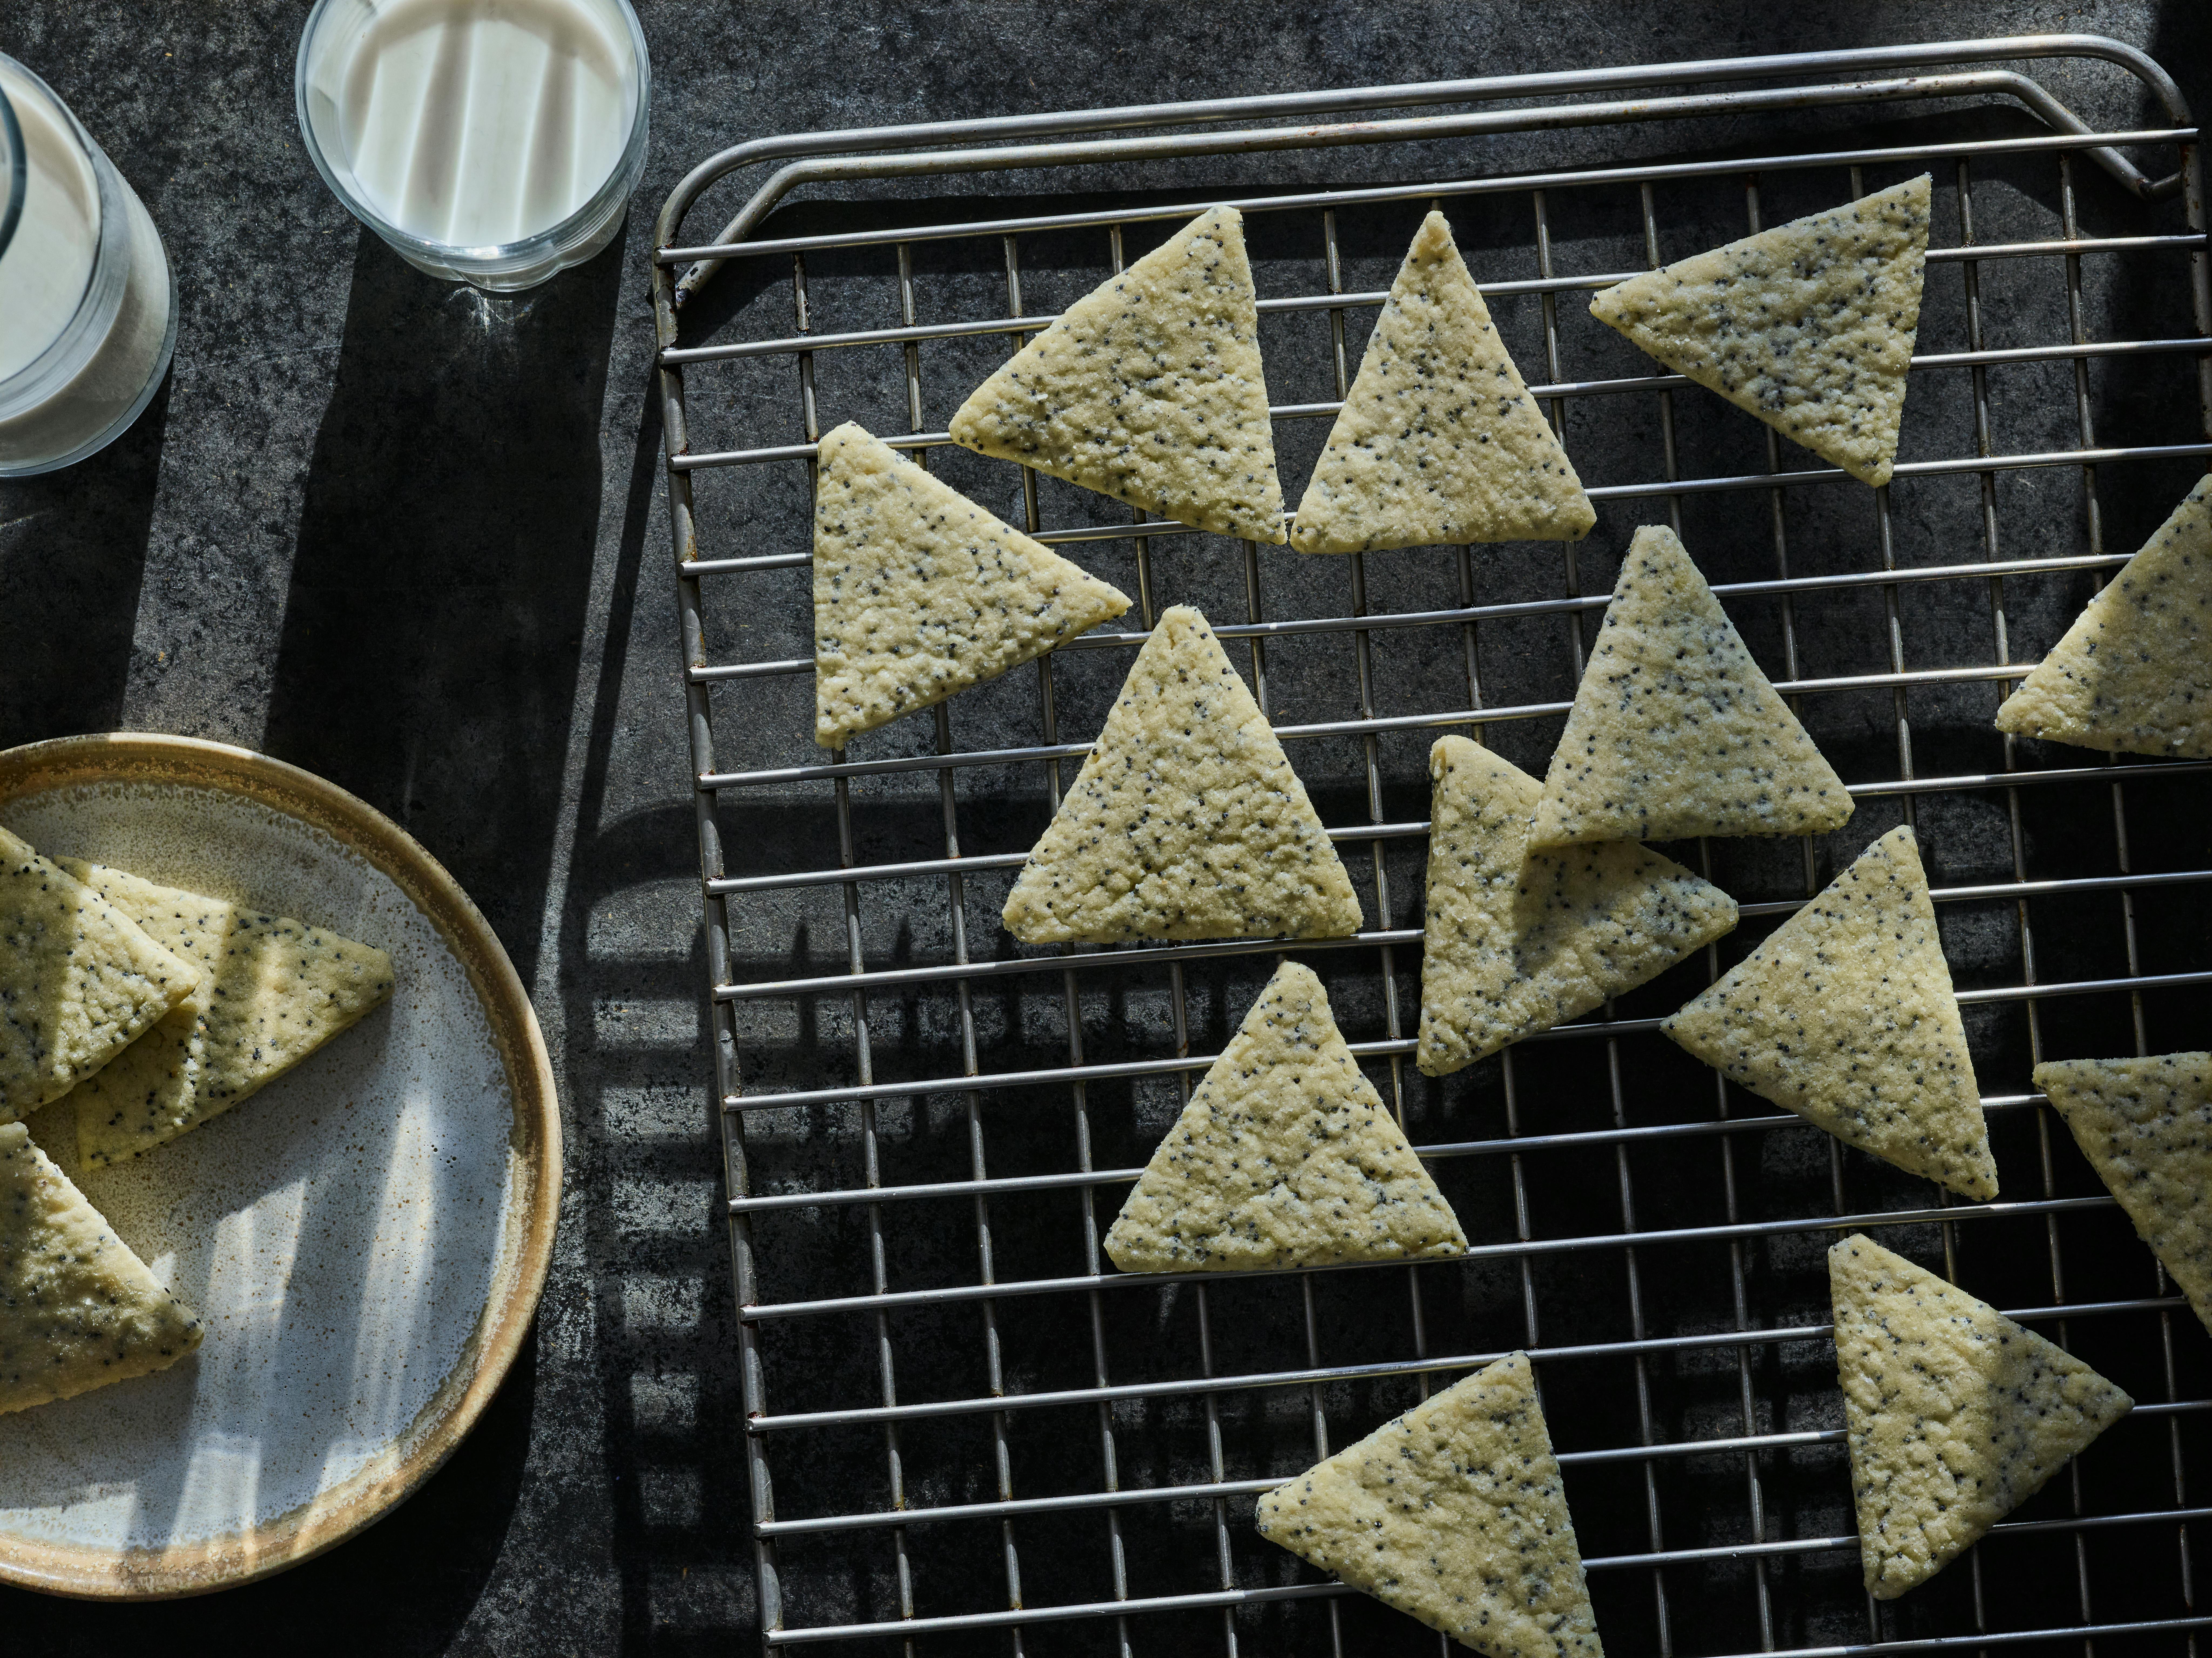 Triangle shaped cookies with poppy seeds